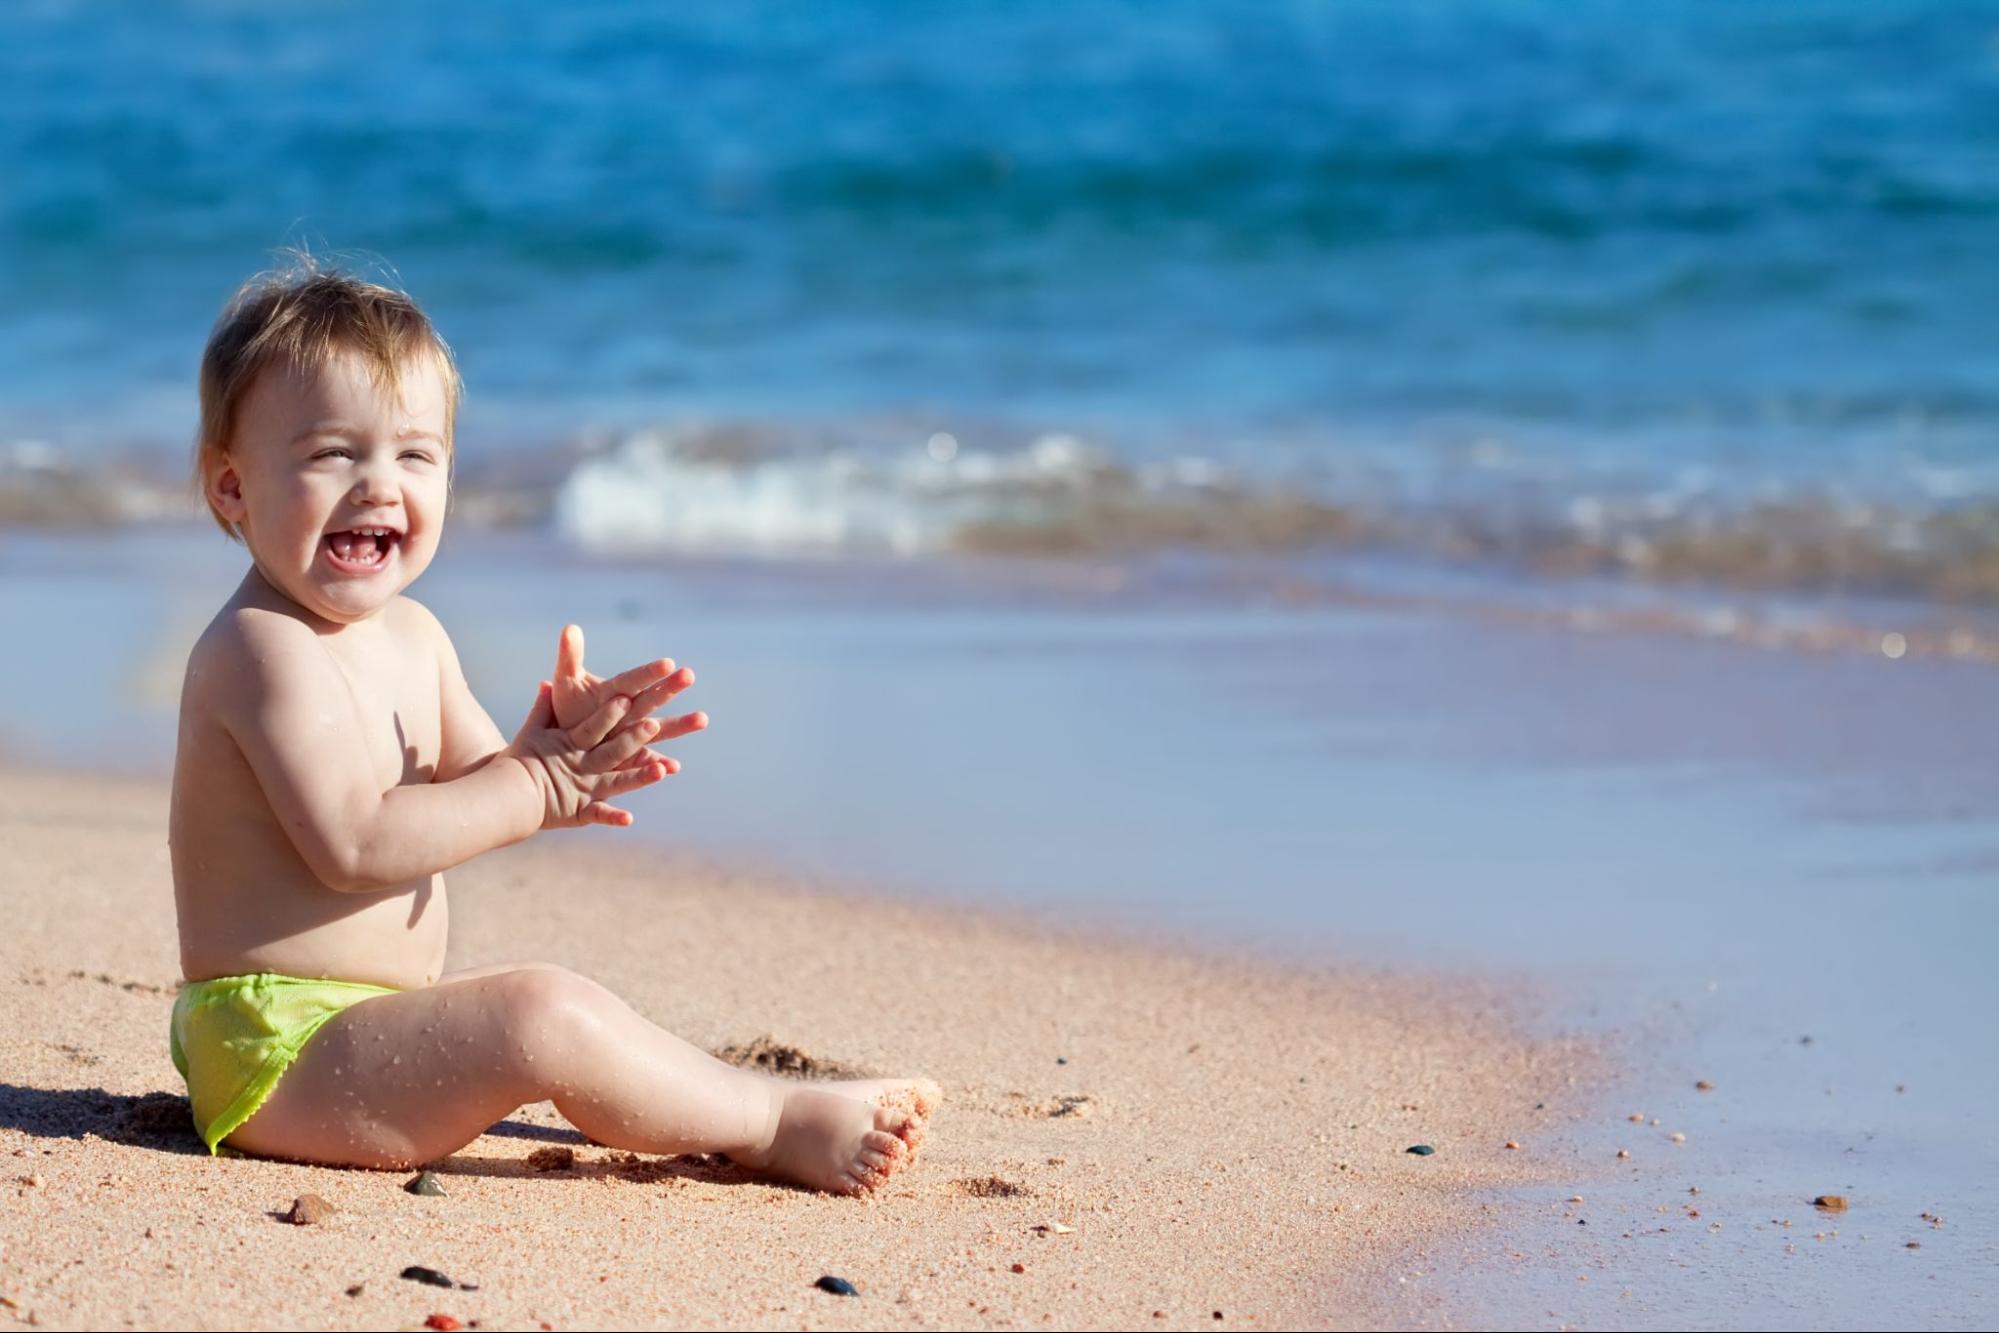 Baby beach or lakeside adventure, capturing sandy toes and sunny smiles